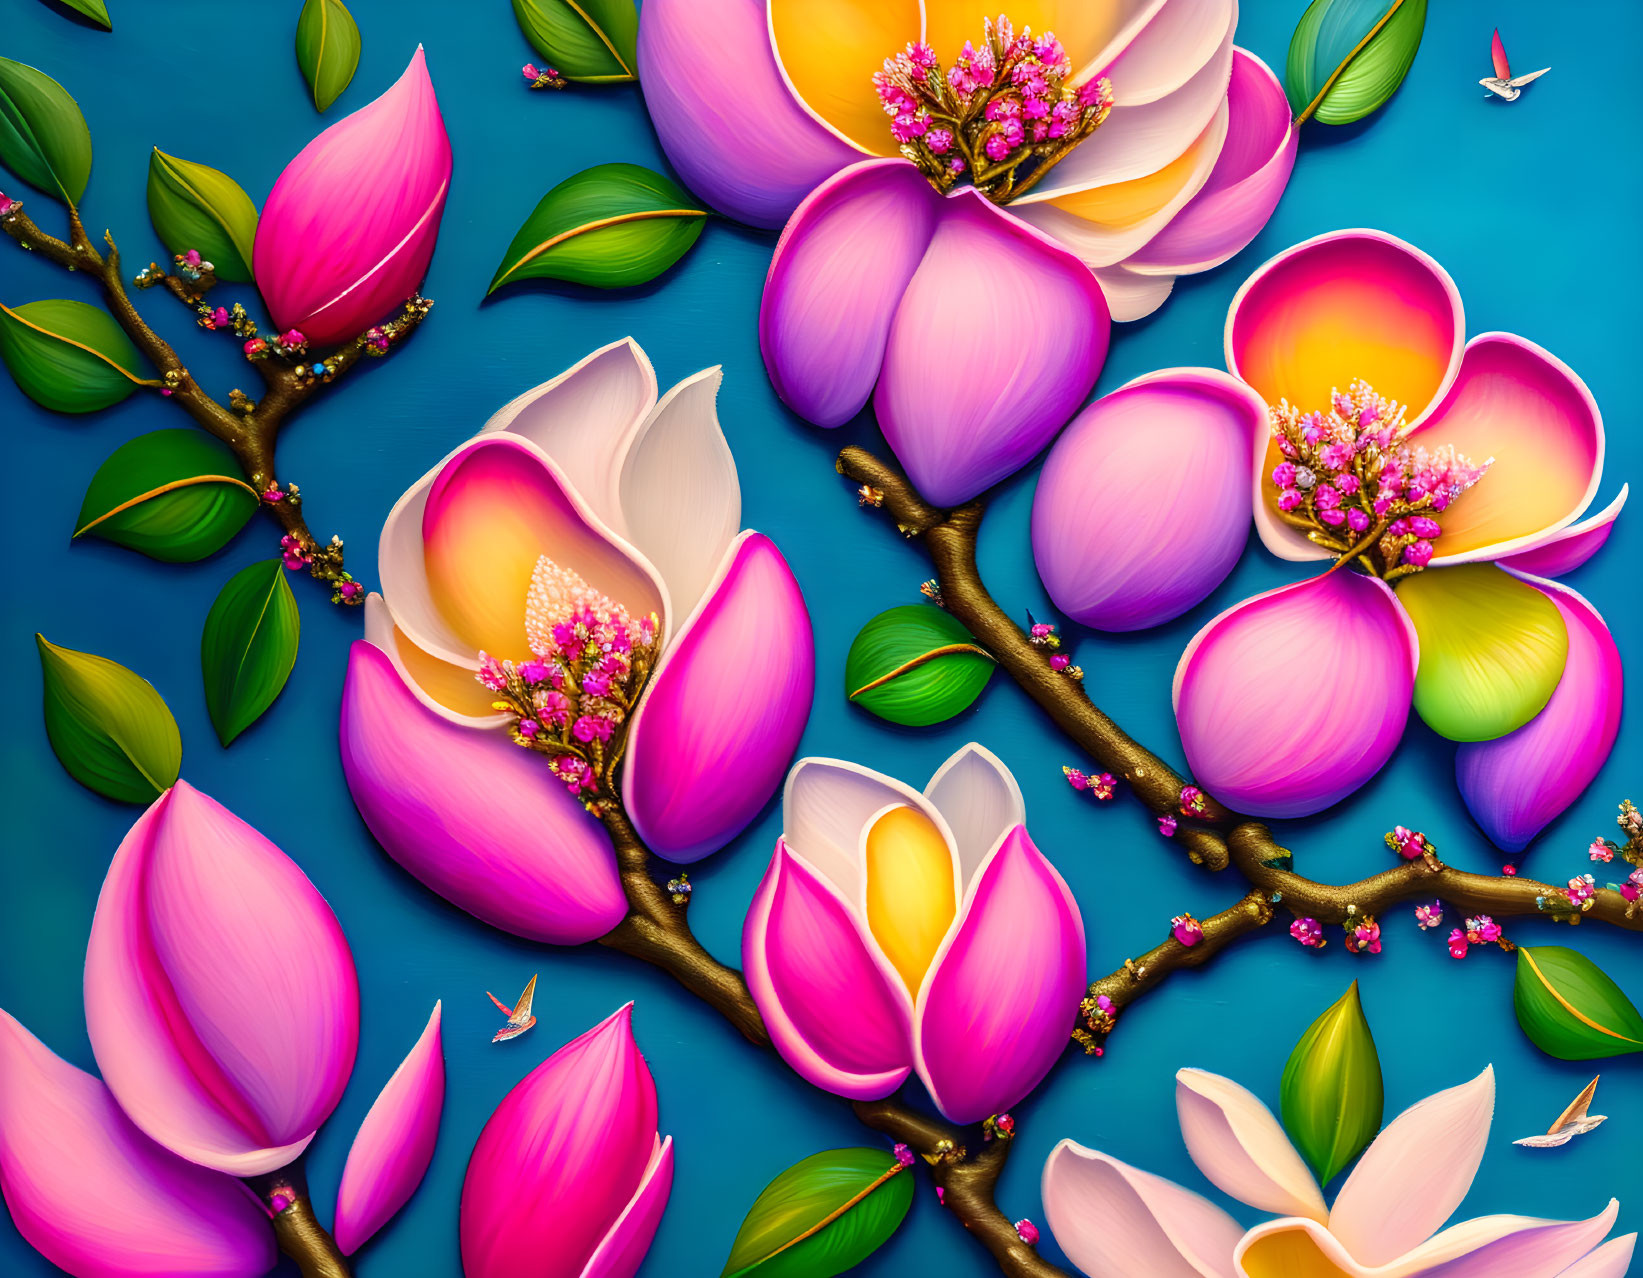 Colorful Stylized Magnolia Flowers Artwork with Birds on Teal Background